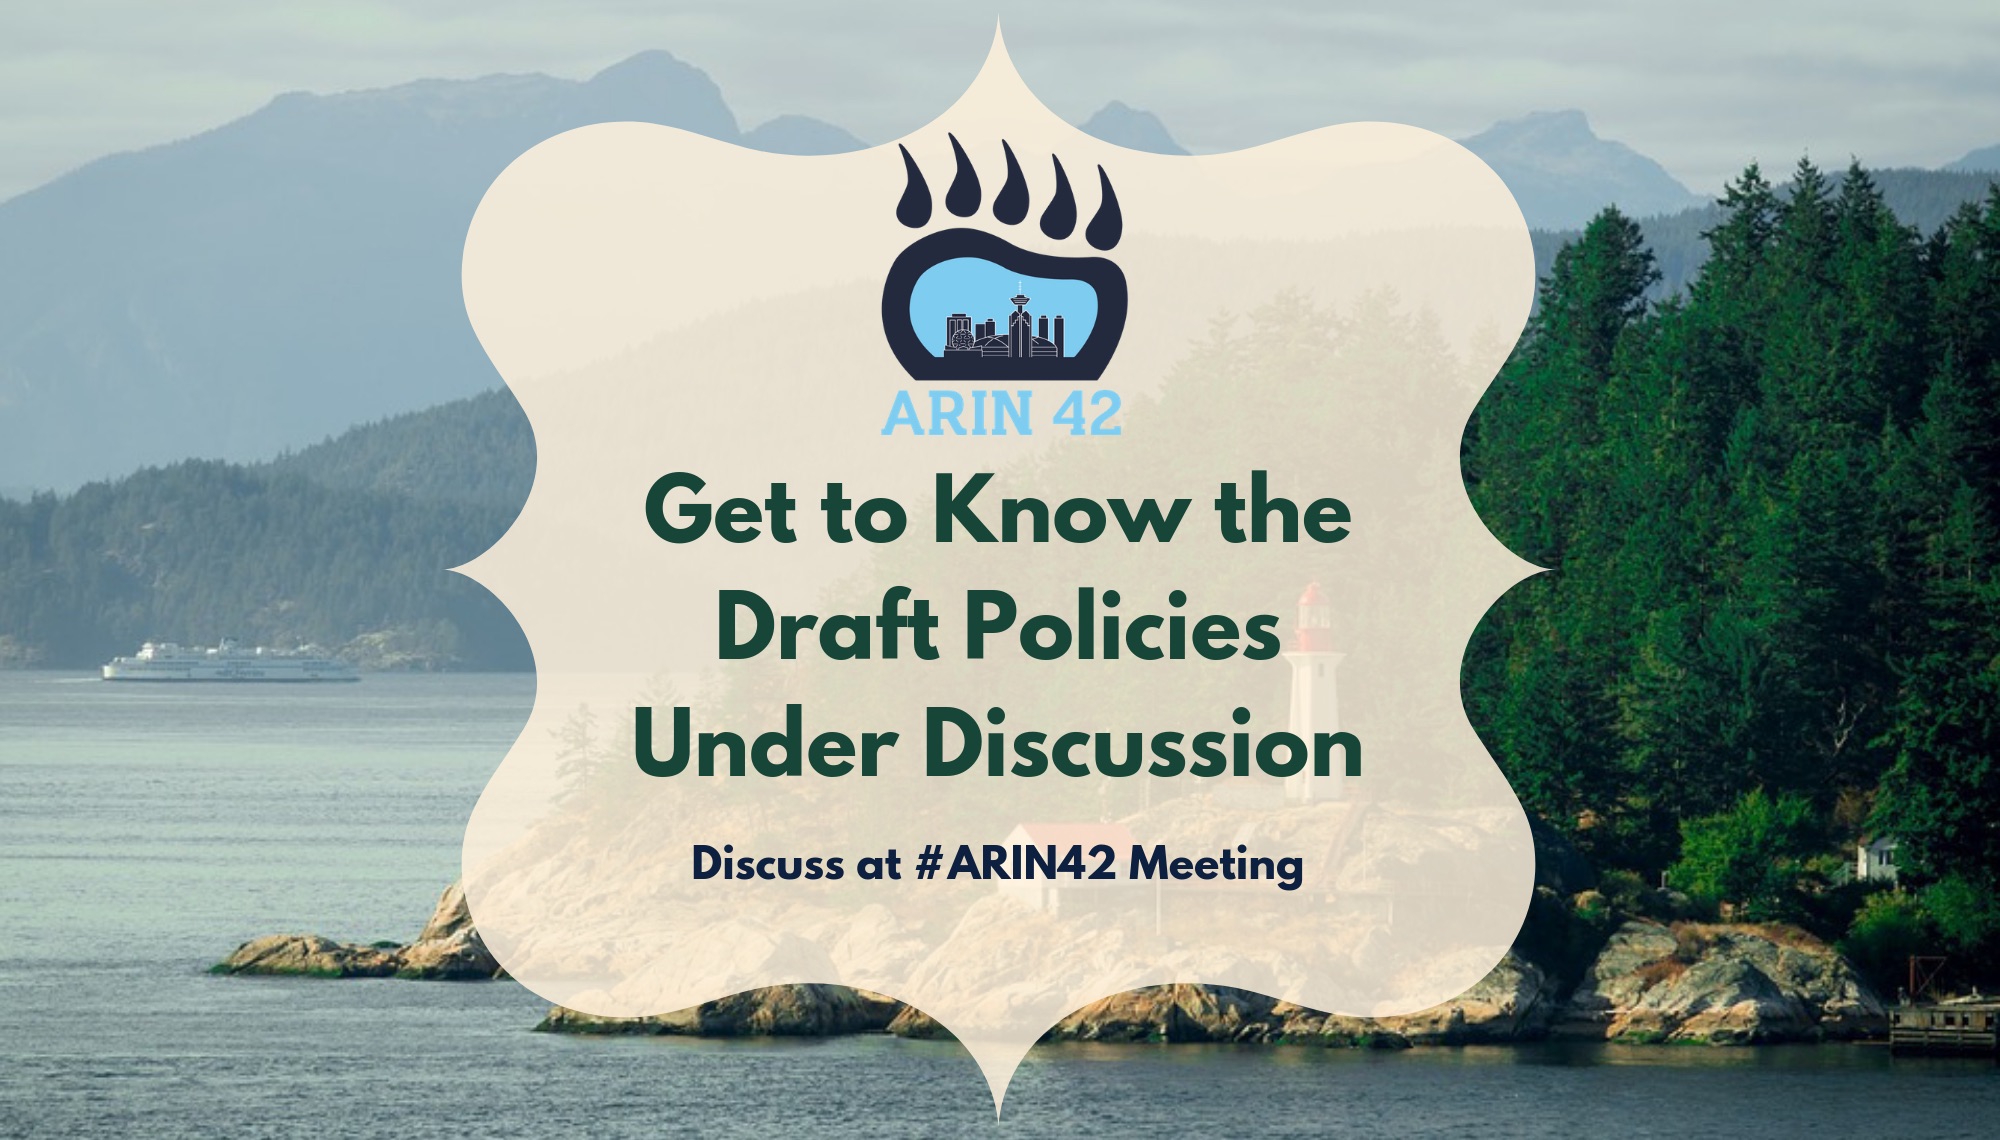 Get to Know the Draft Policies Under Discussion at ARIN 42